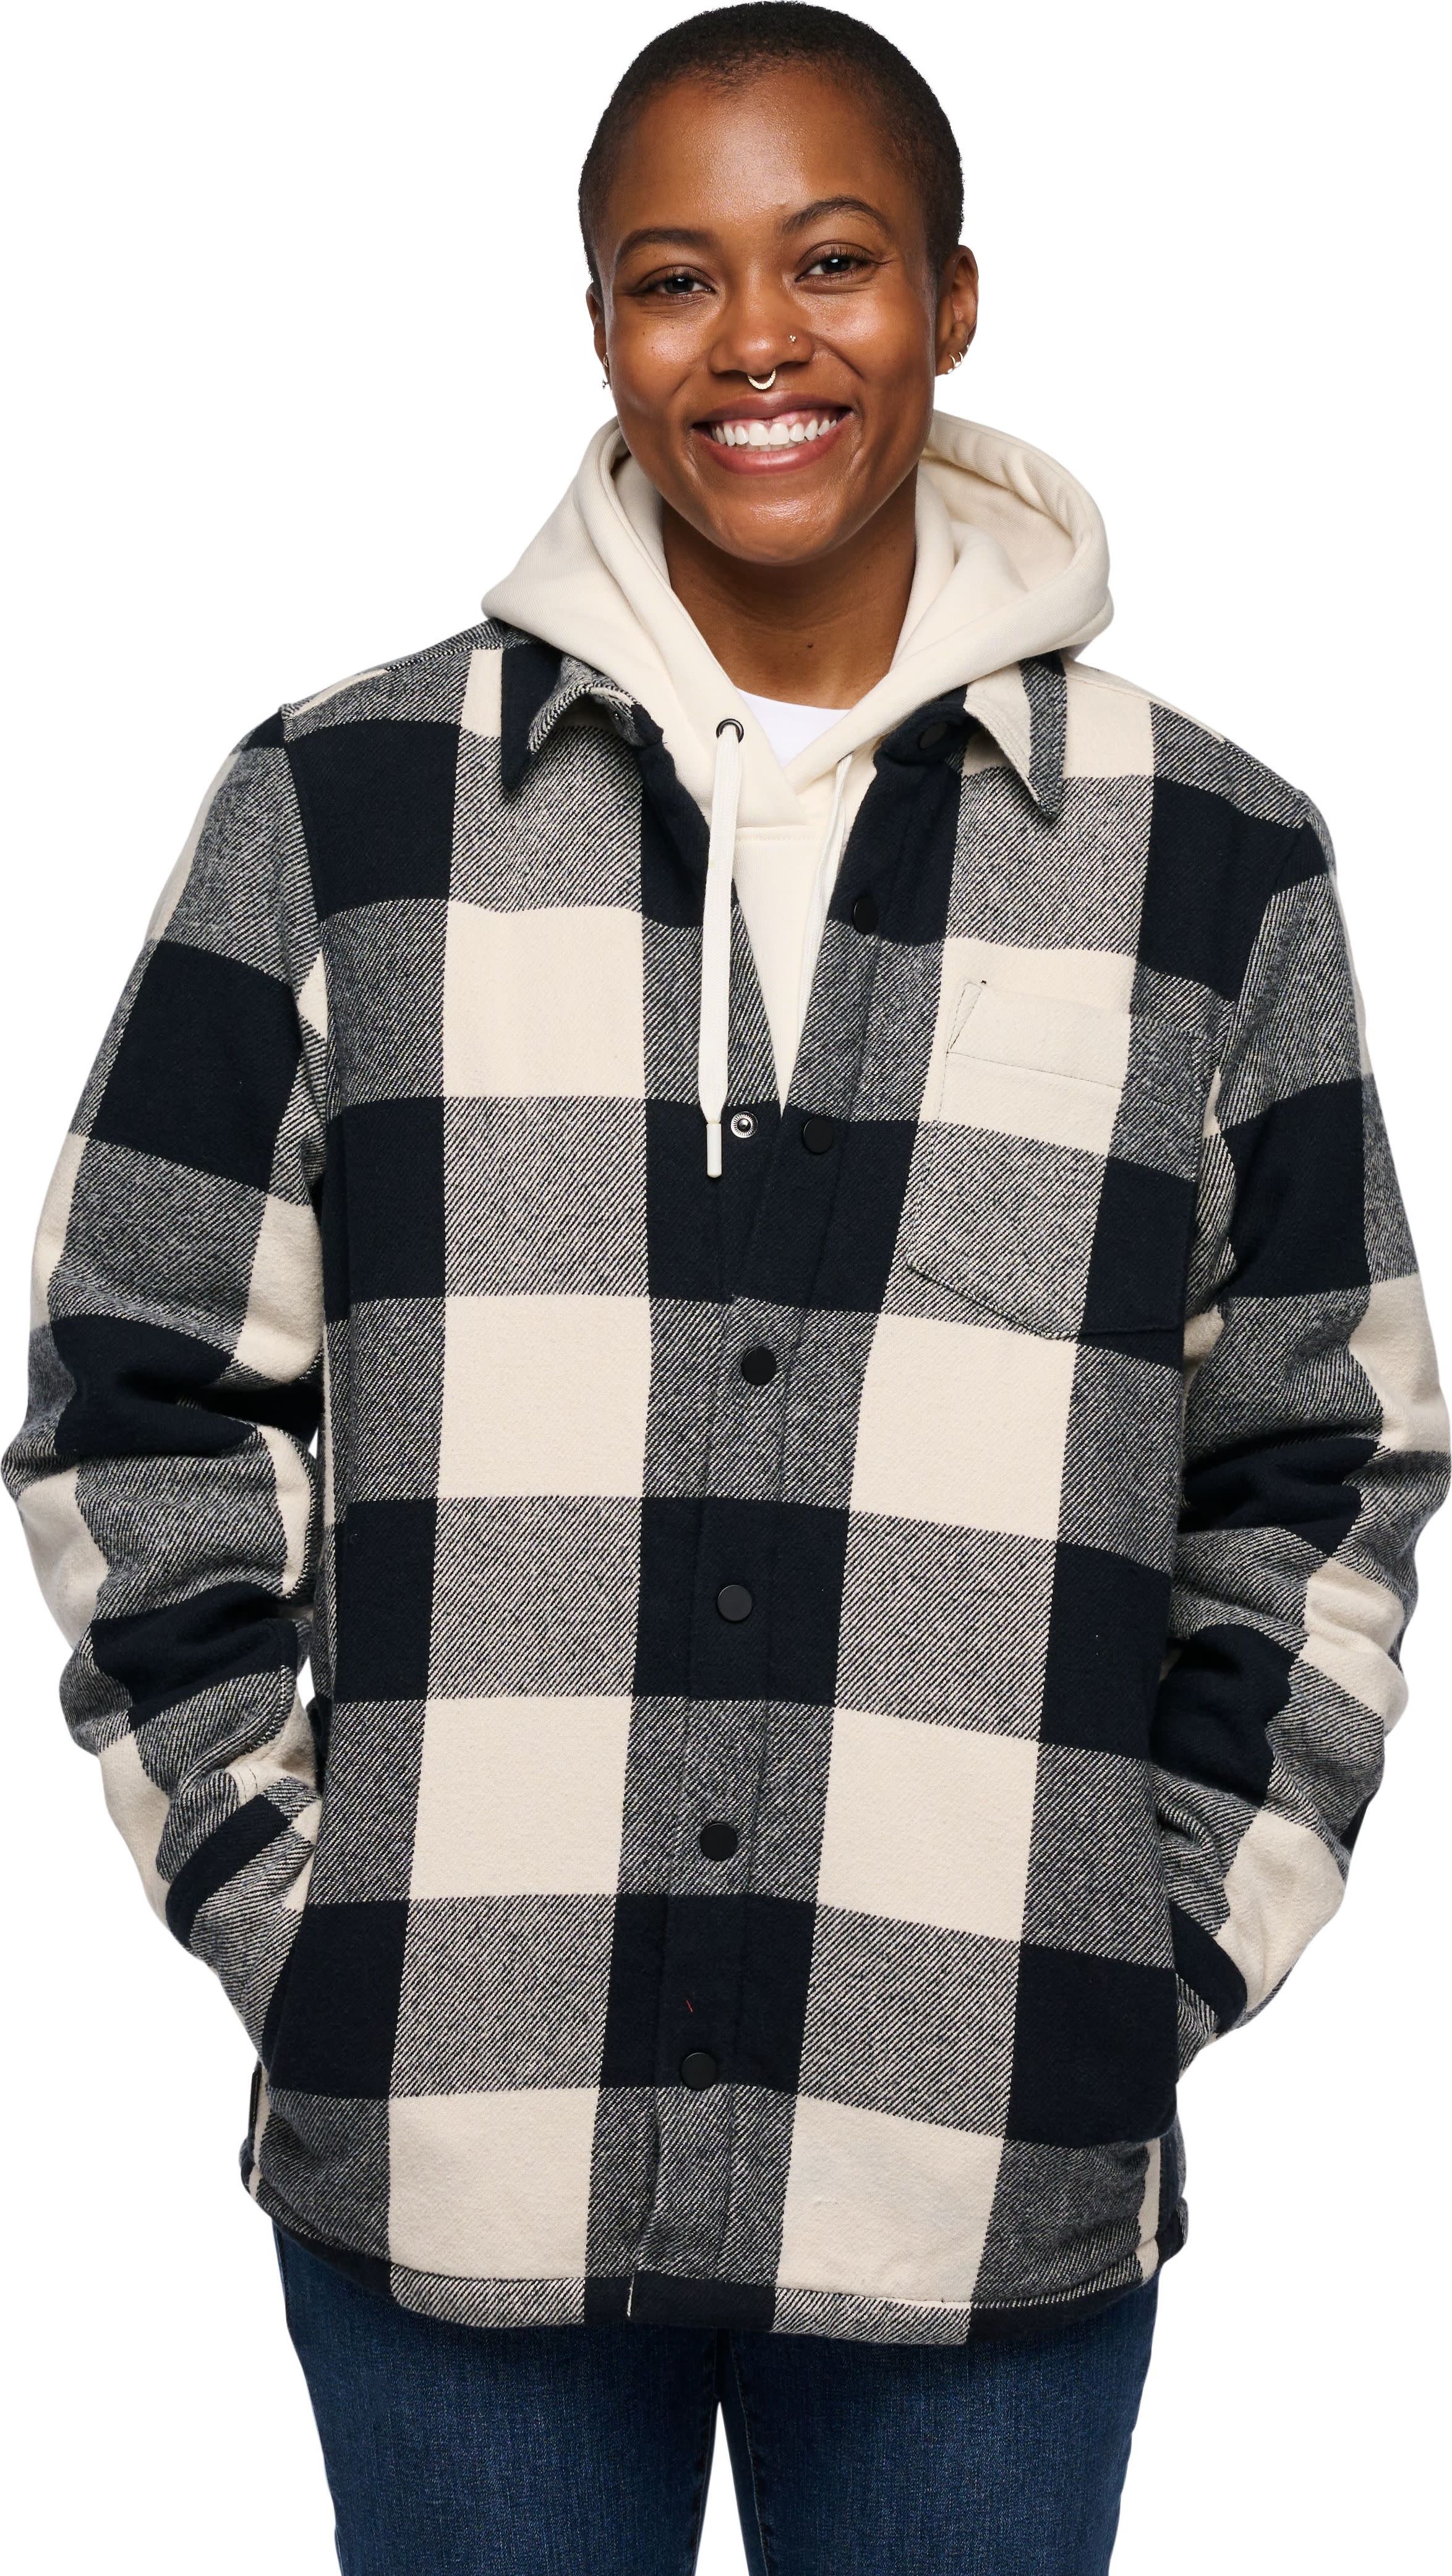 Women’s Project Lined Flannel Shirt Black-Off White Plaid